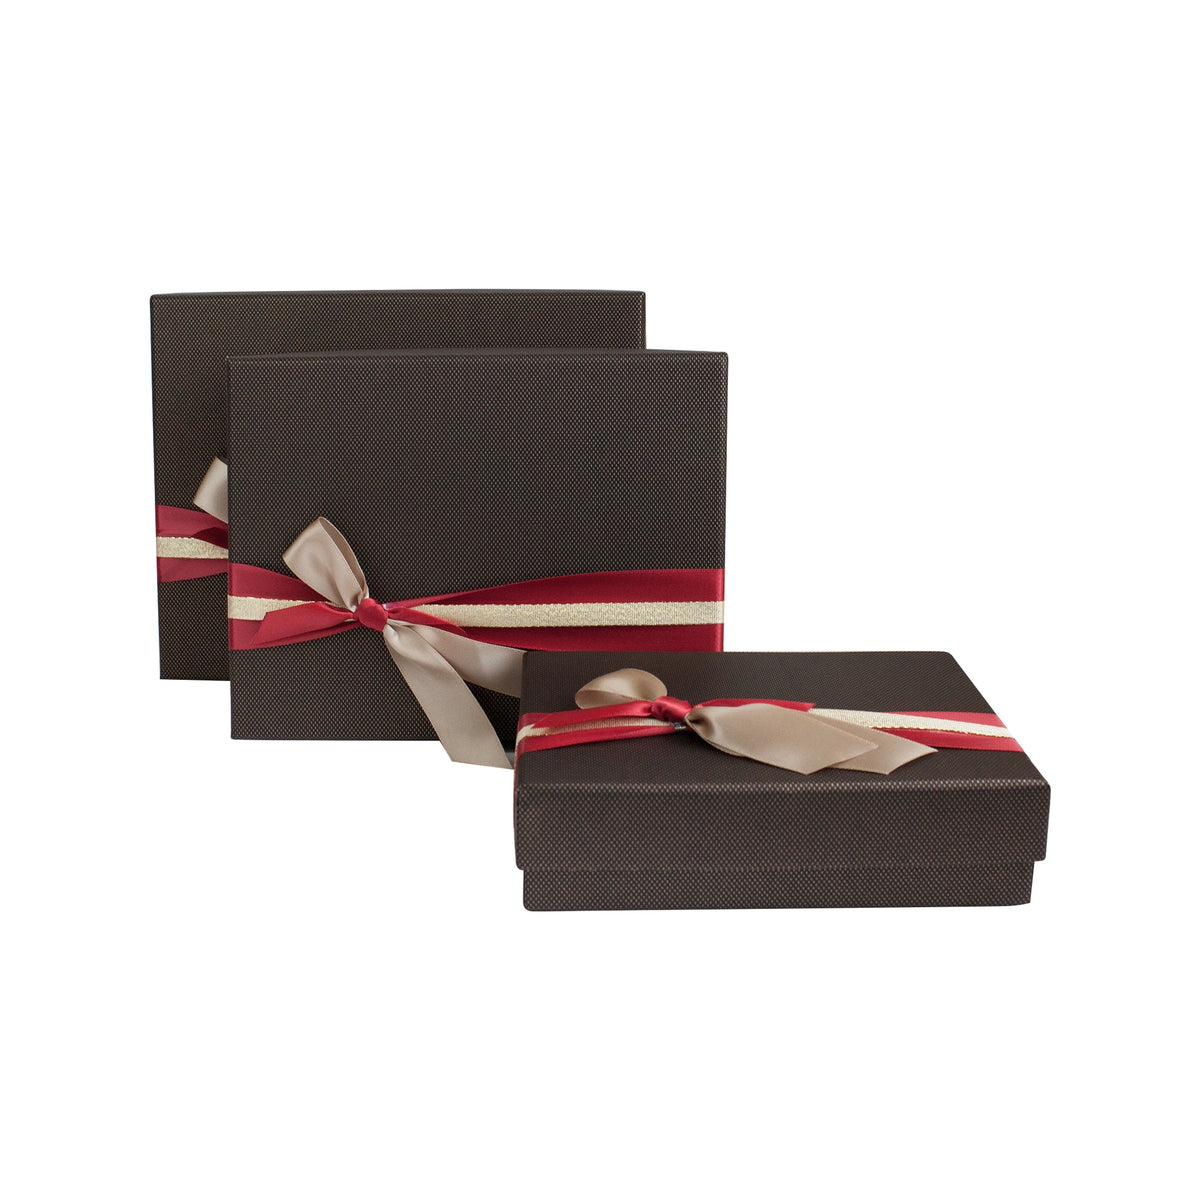 Elegant Textured Brown Gift Boxes - Set of 3 (Sizes Available)